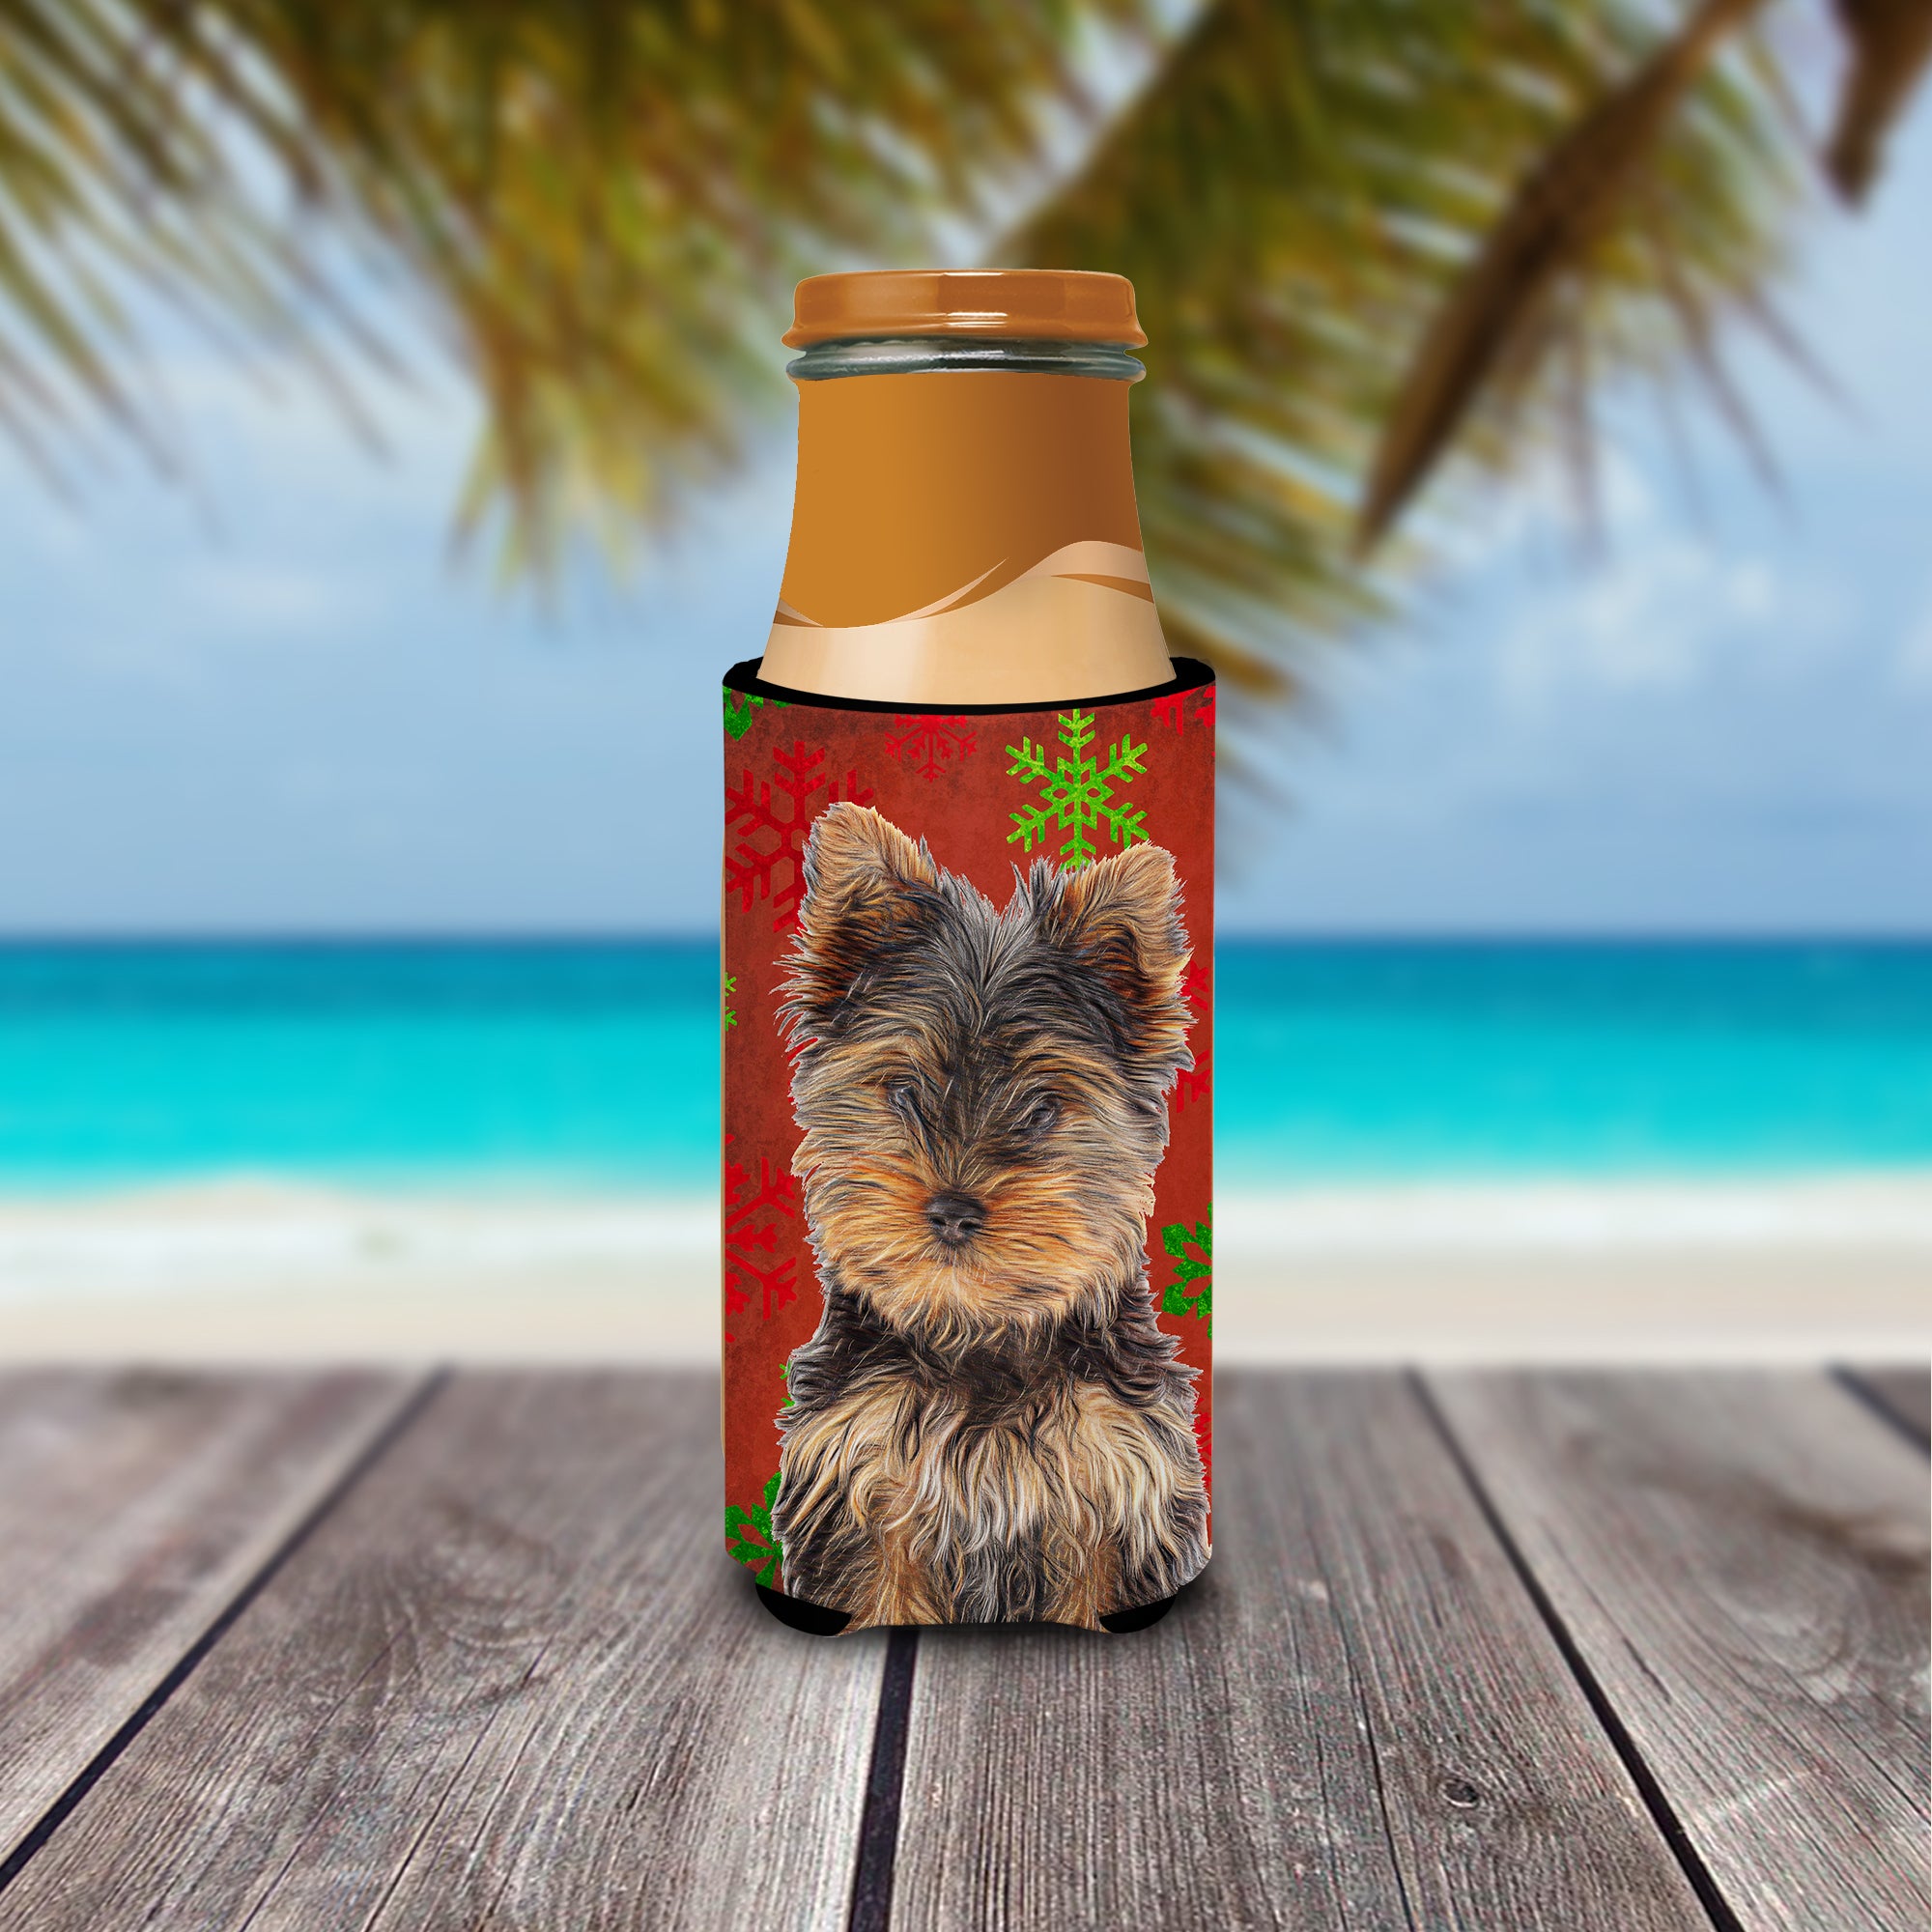 Red Snowflakes Holiday Christmas Yorkie Puppy / Yorkshire Terrier Ultra Beverage Insulators for slim cans KJ1188MUK.